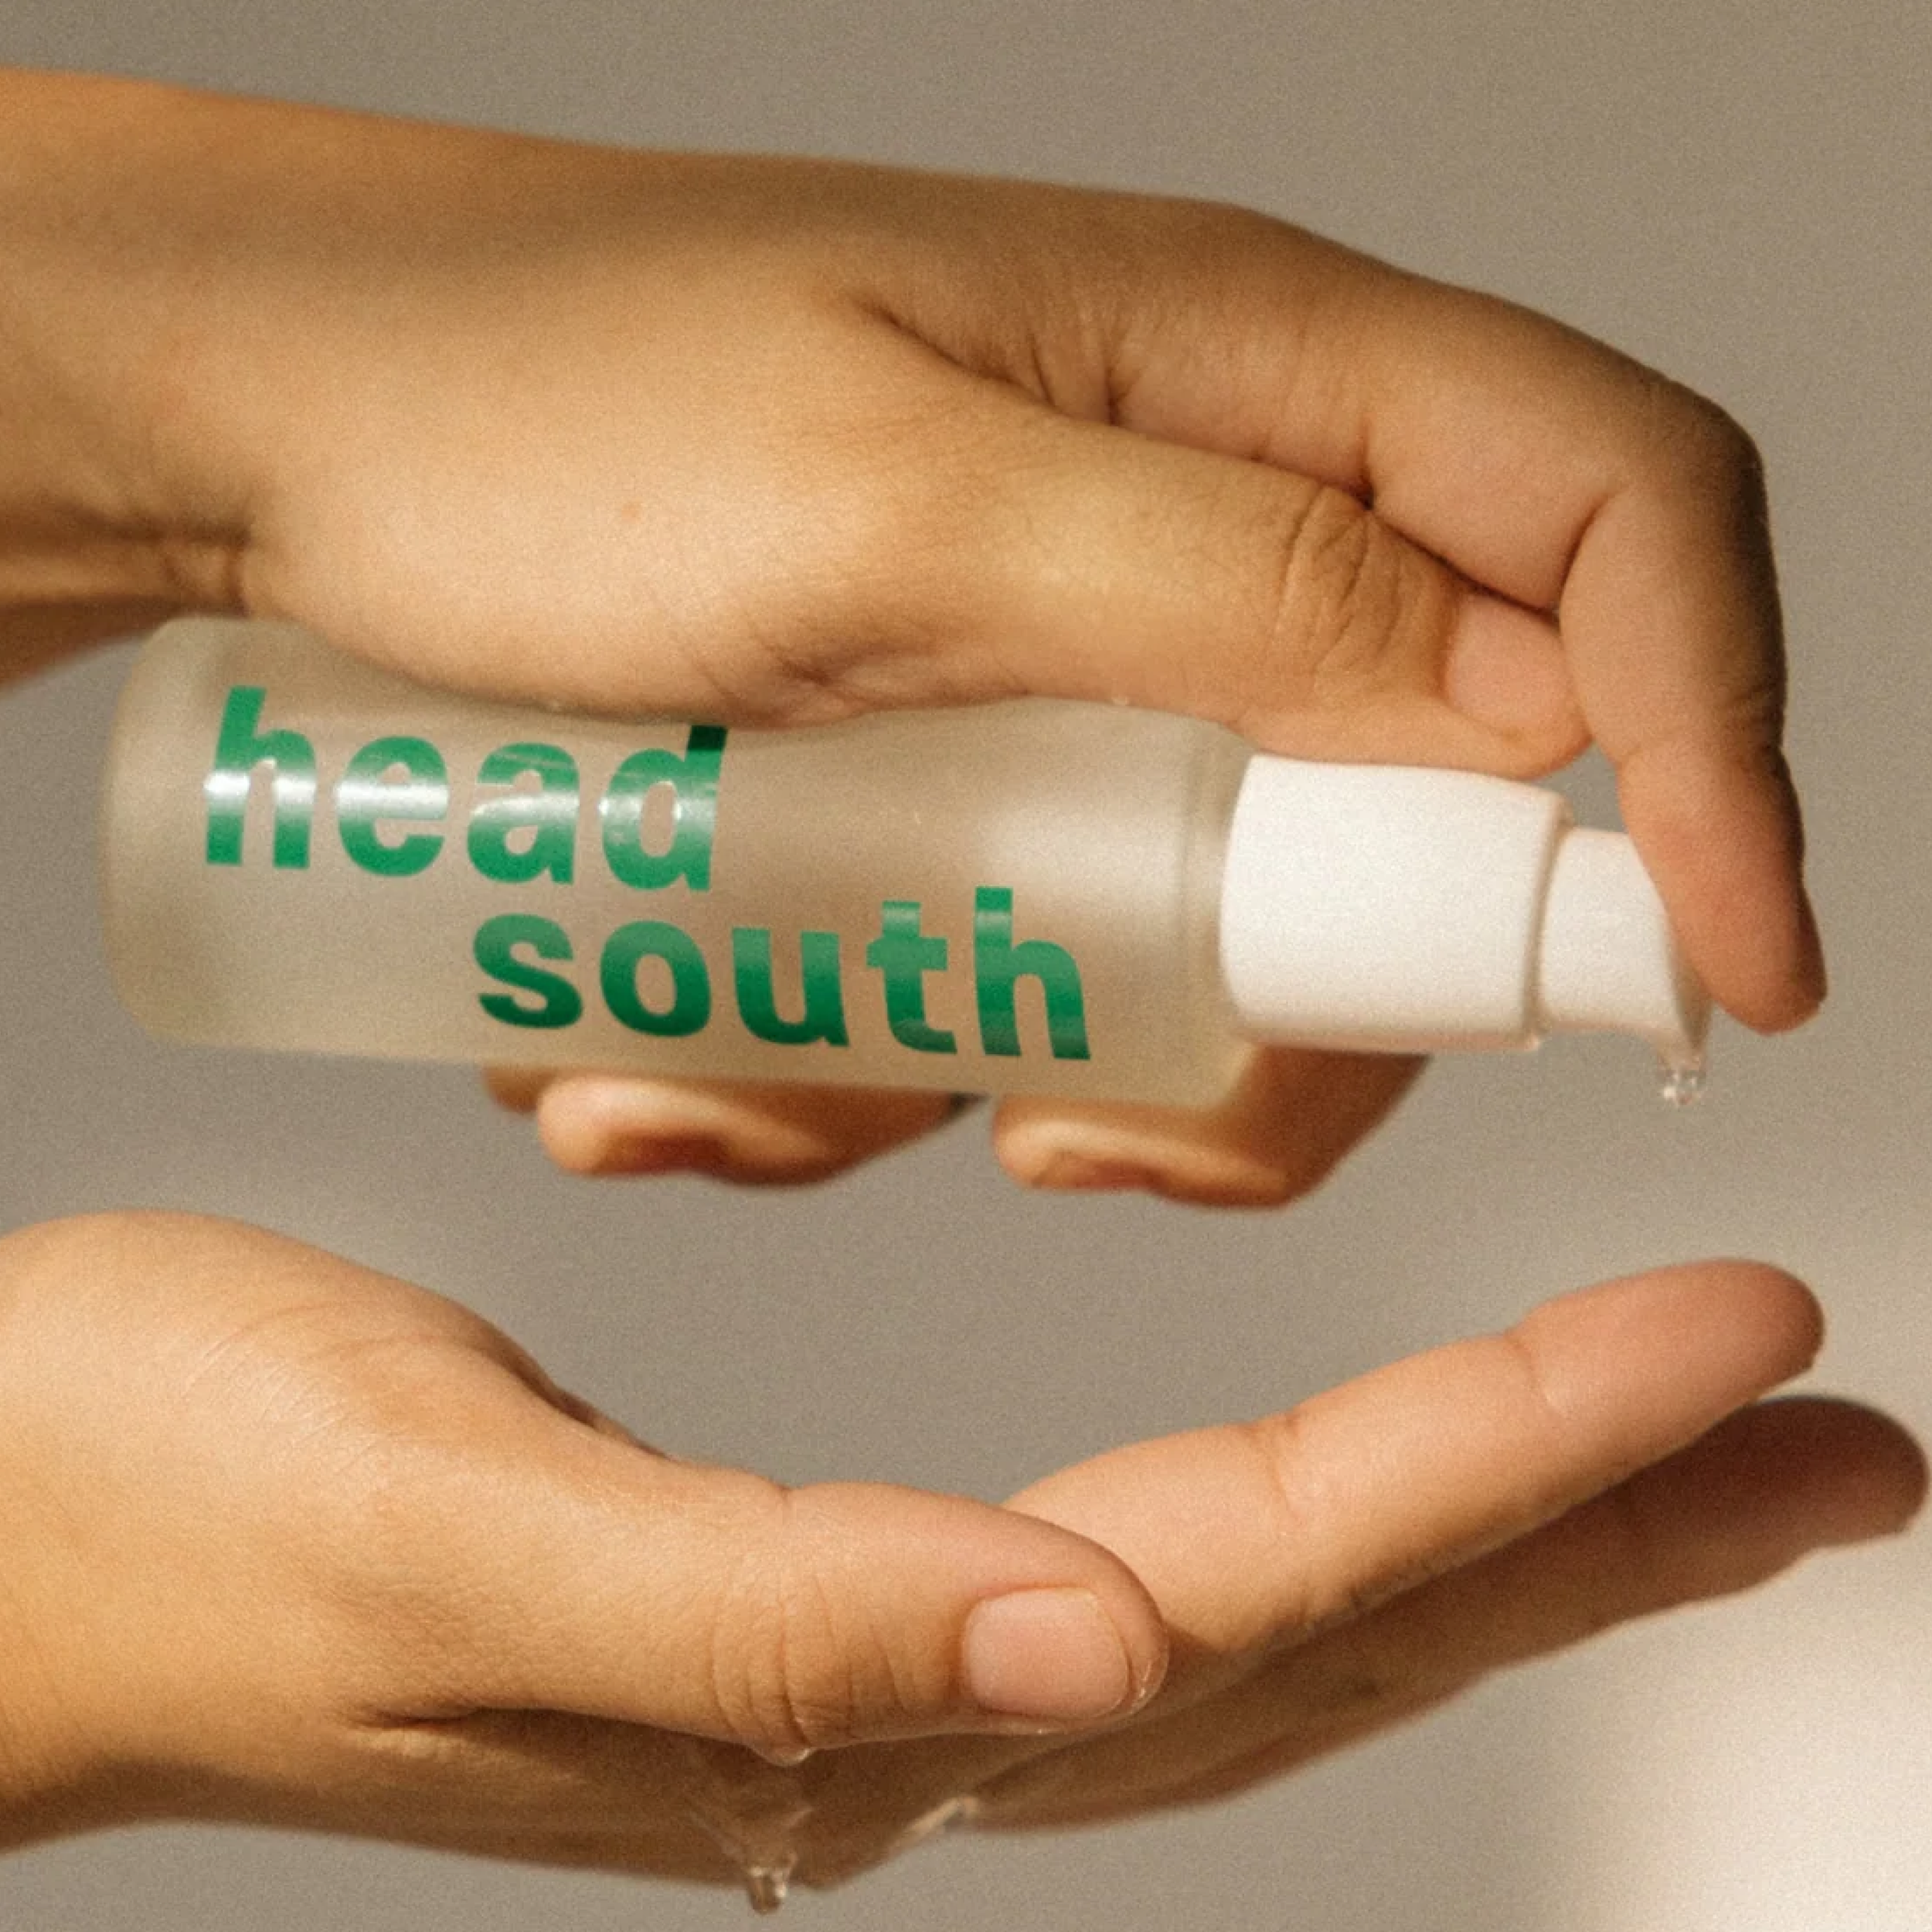 Head South-product 3-Famm@2x.png